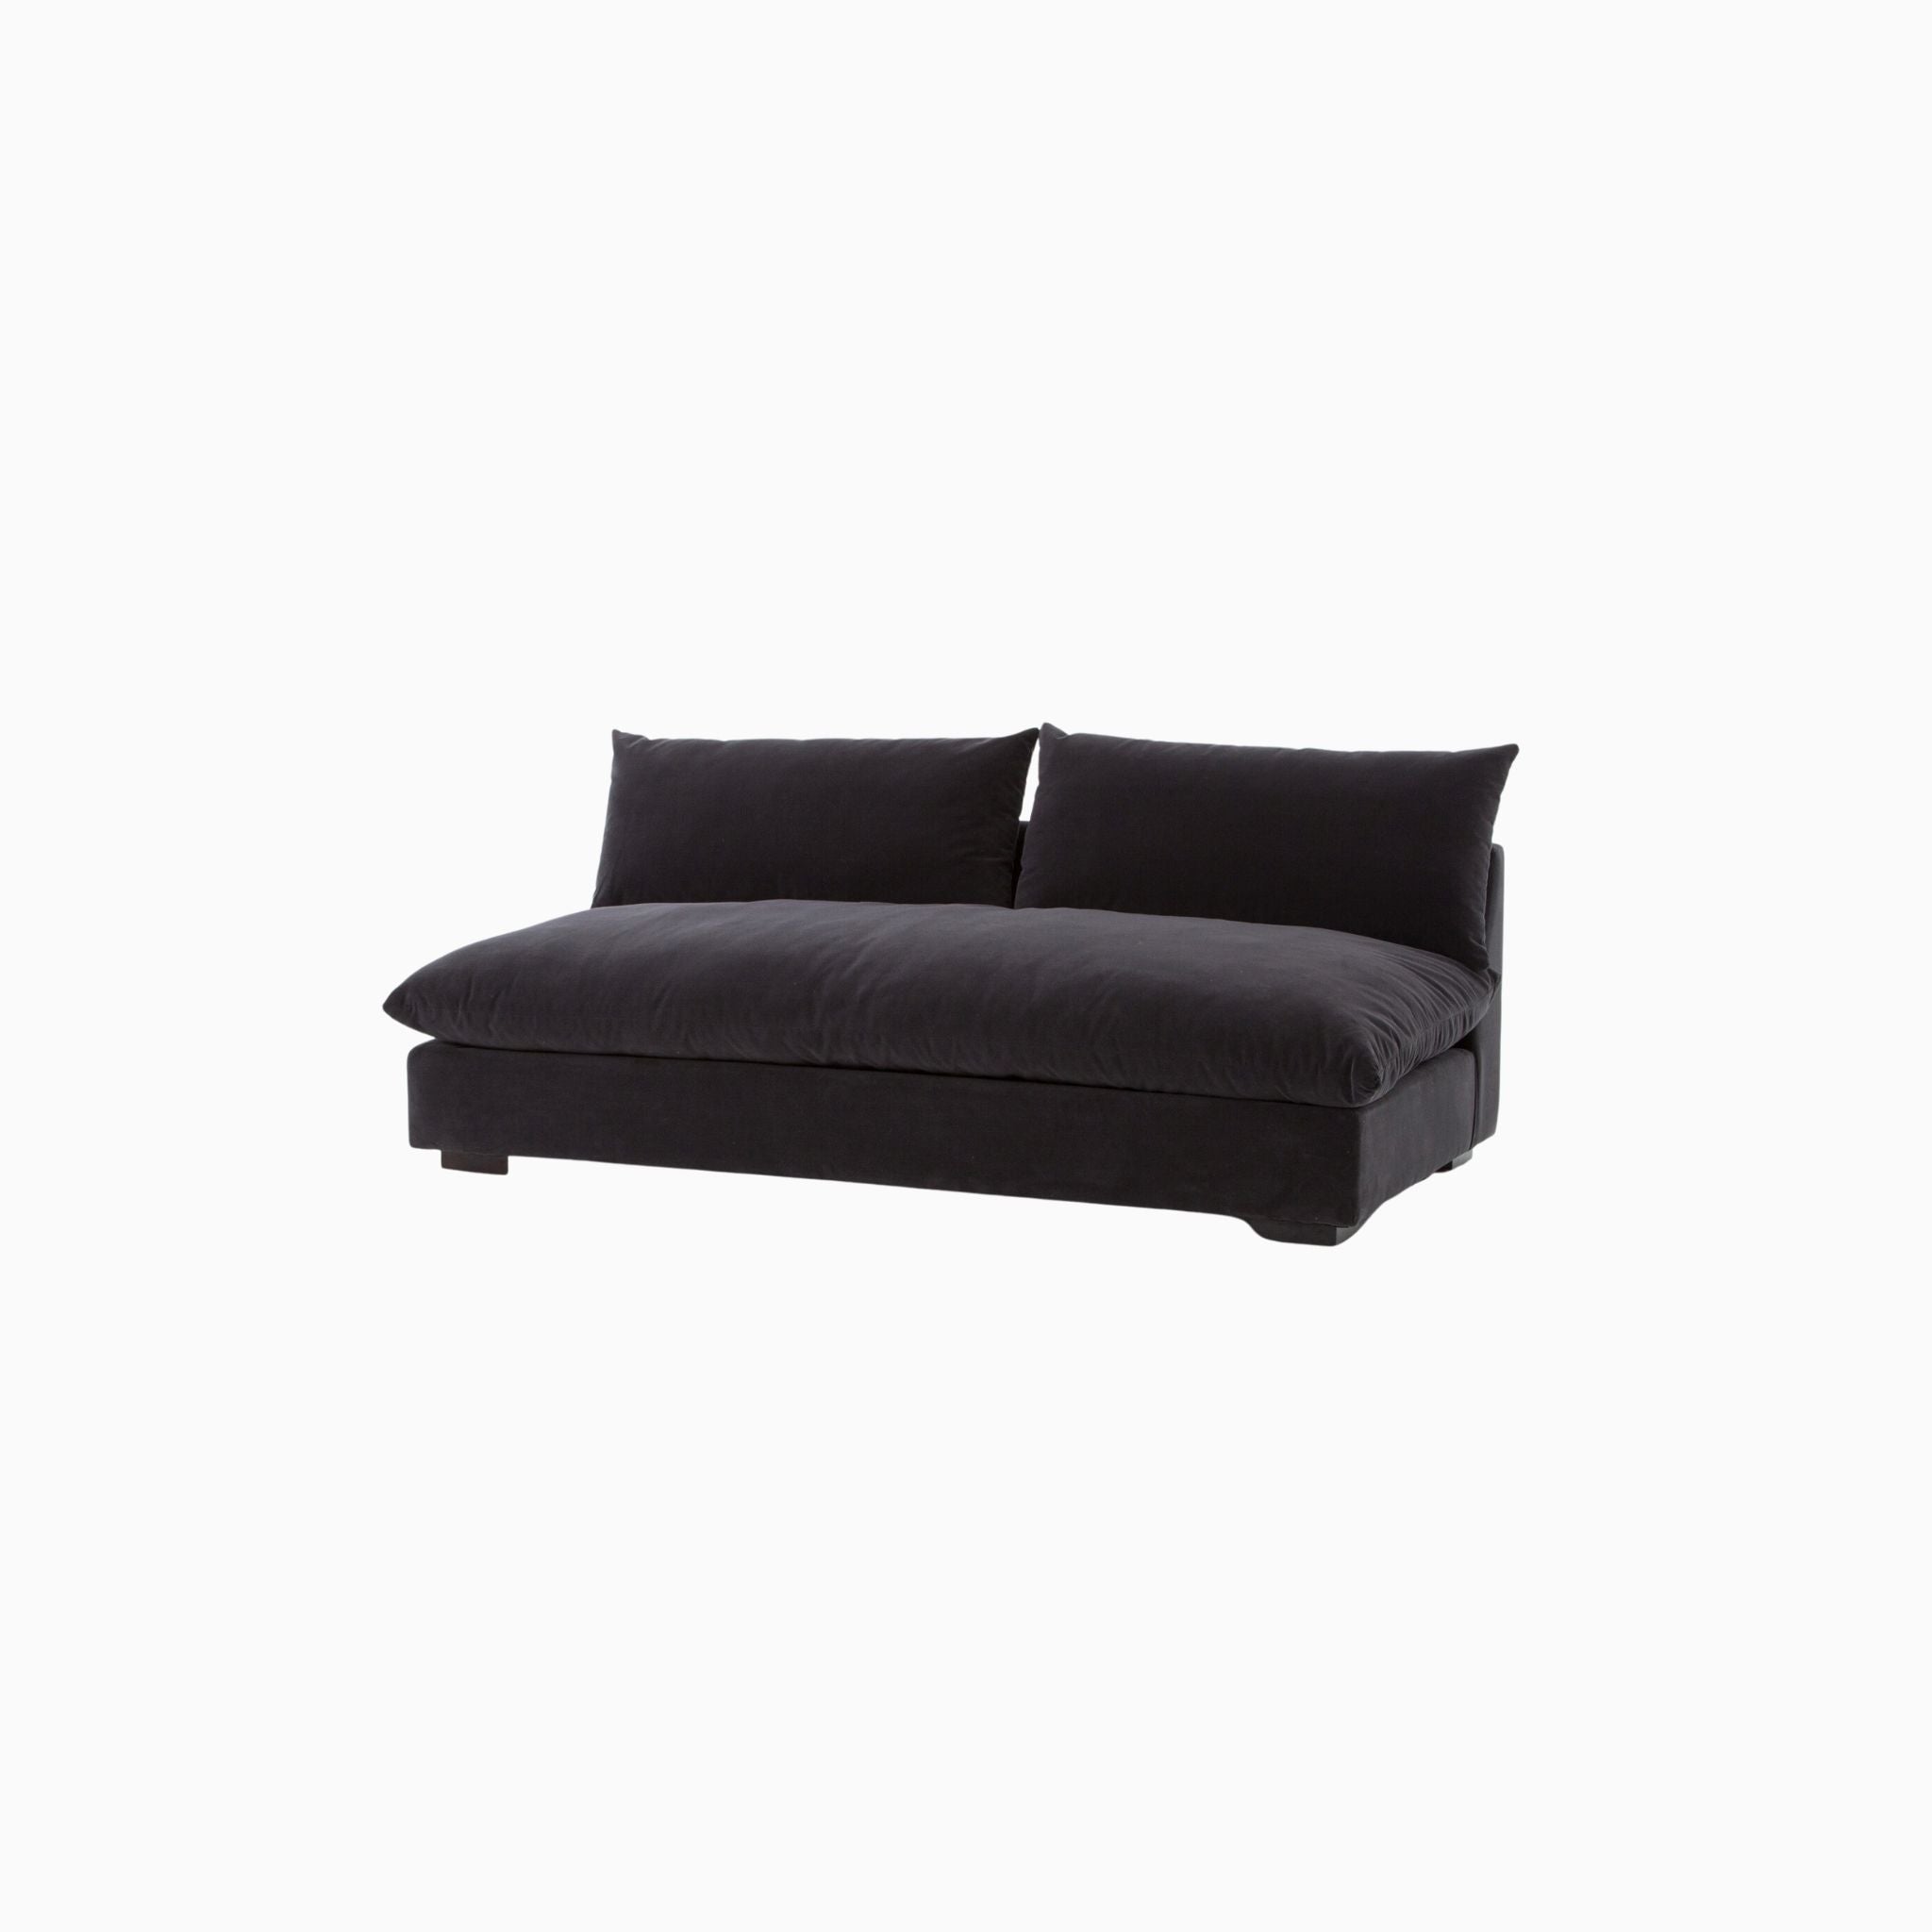 GRANT SECTIONAL - ARMLESS PIECE